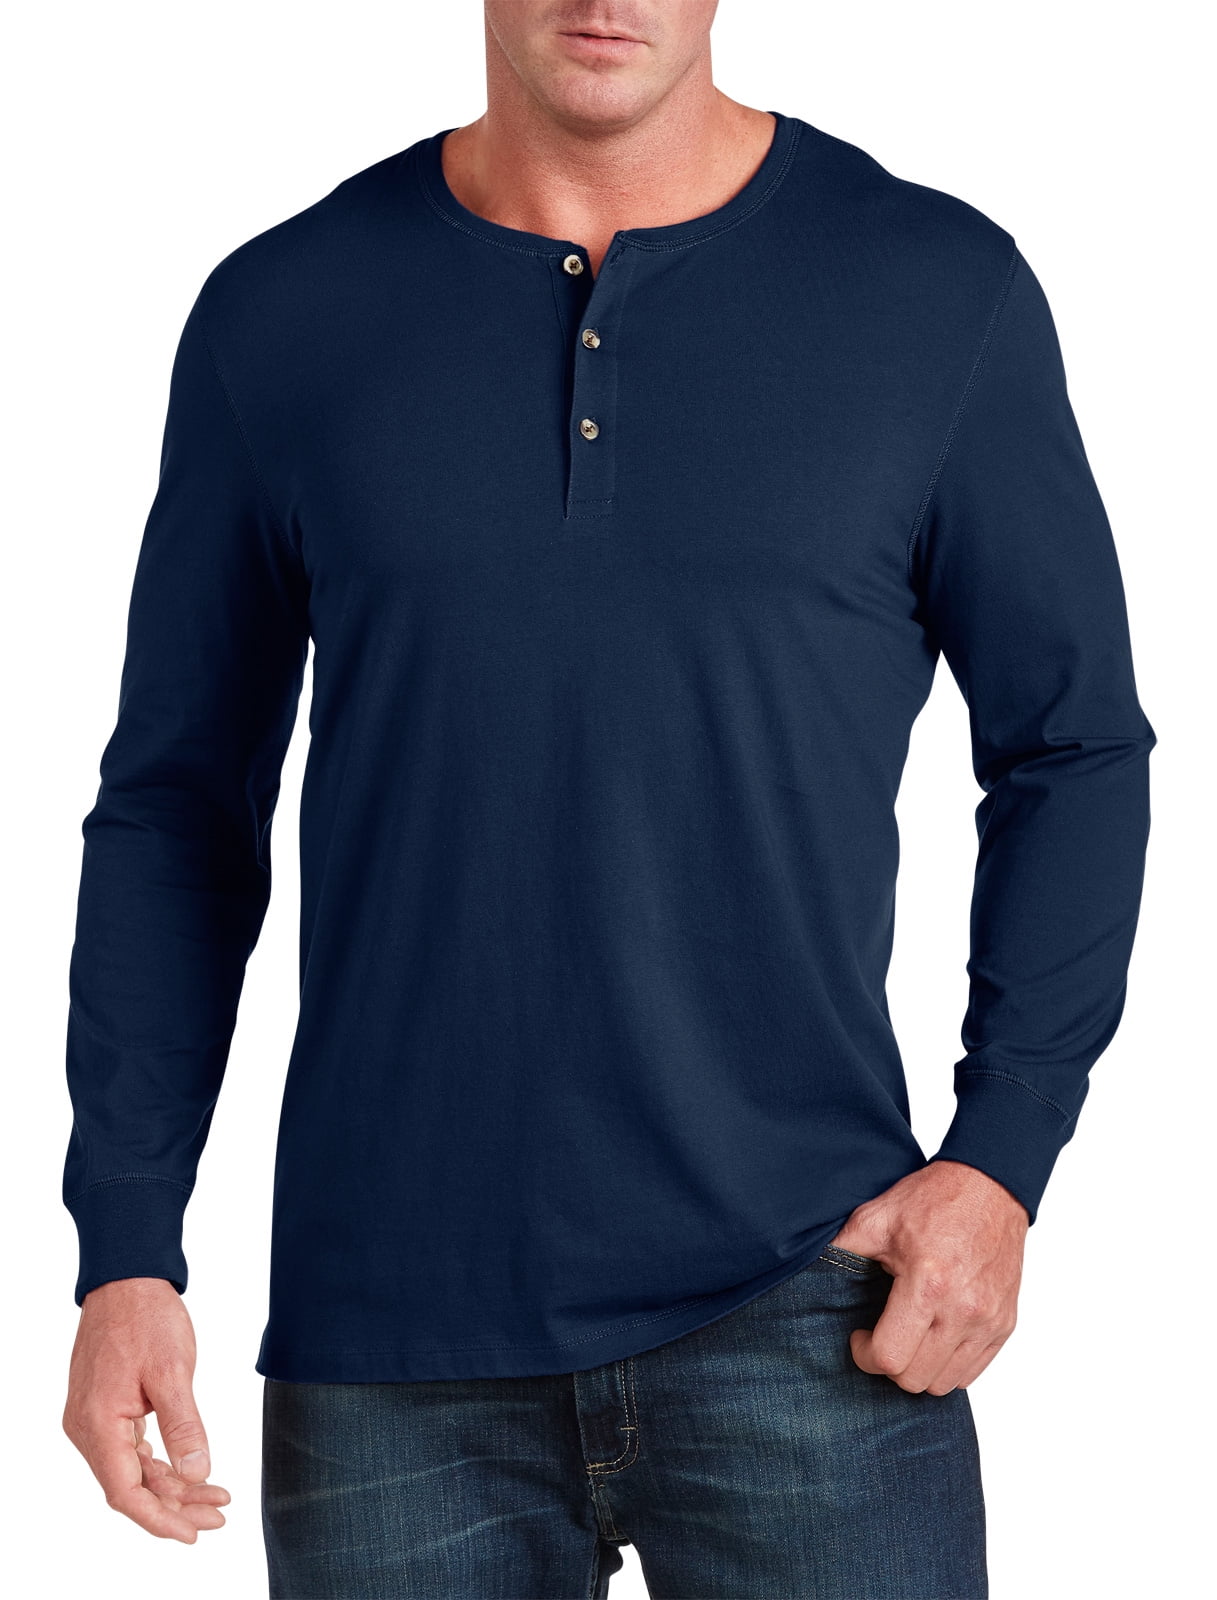 Harbor Bay by DXL Big and Tall Men's Long-Sleeve Wicking Henley Shirt ...